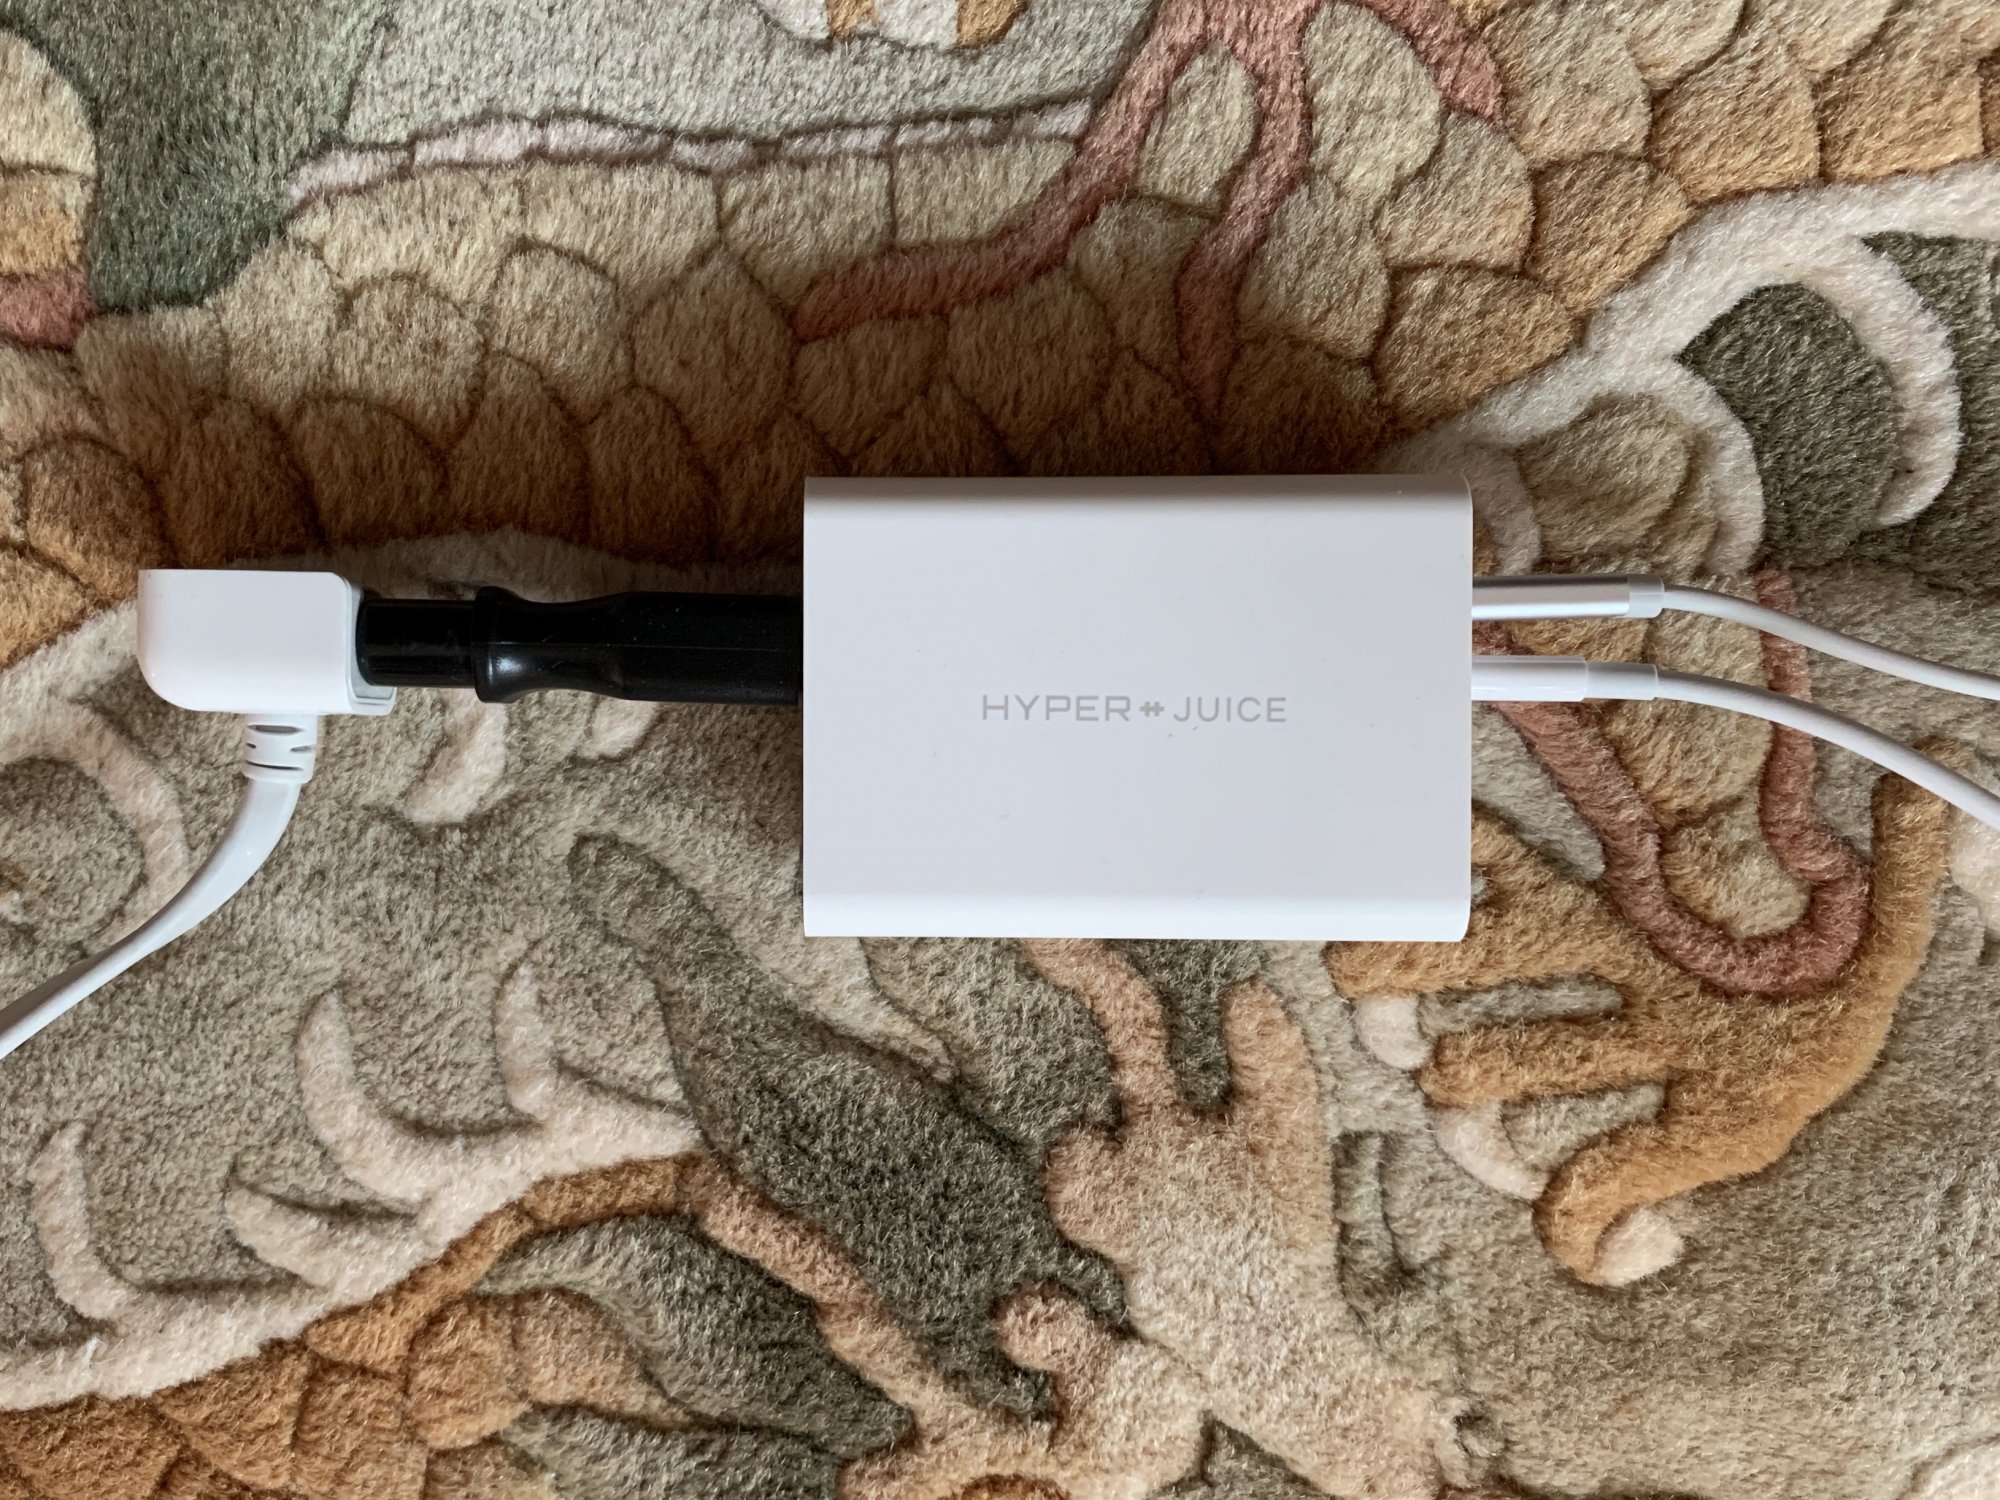 HYPER Launches 'HyperJuice' Compact 100W USB-C GaN Charger, Page 3